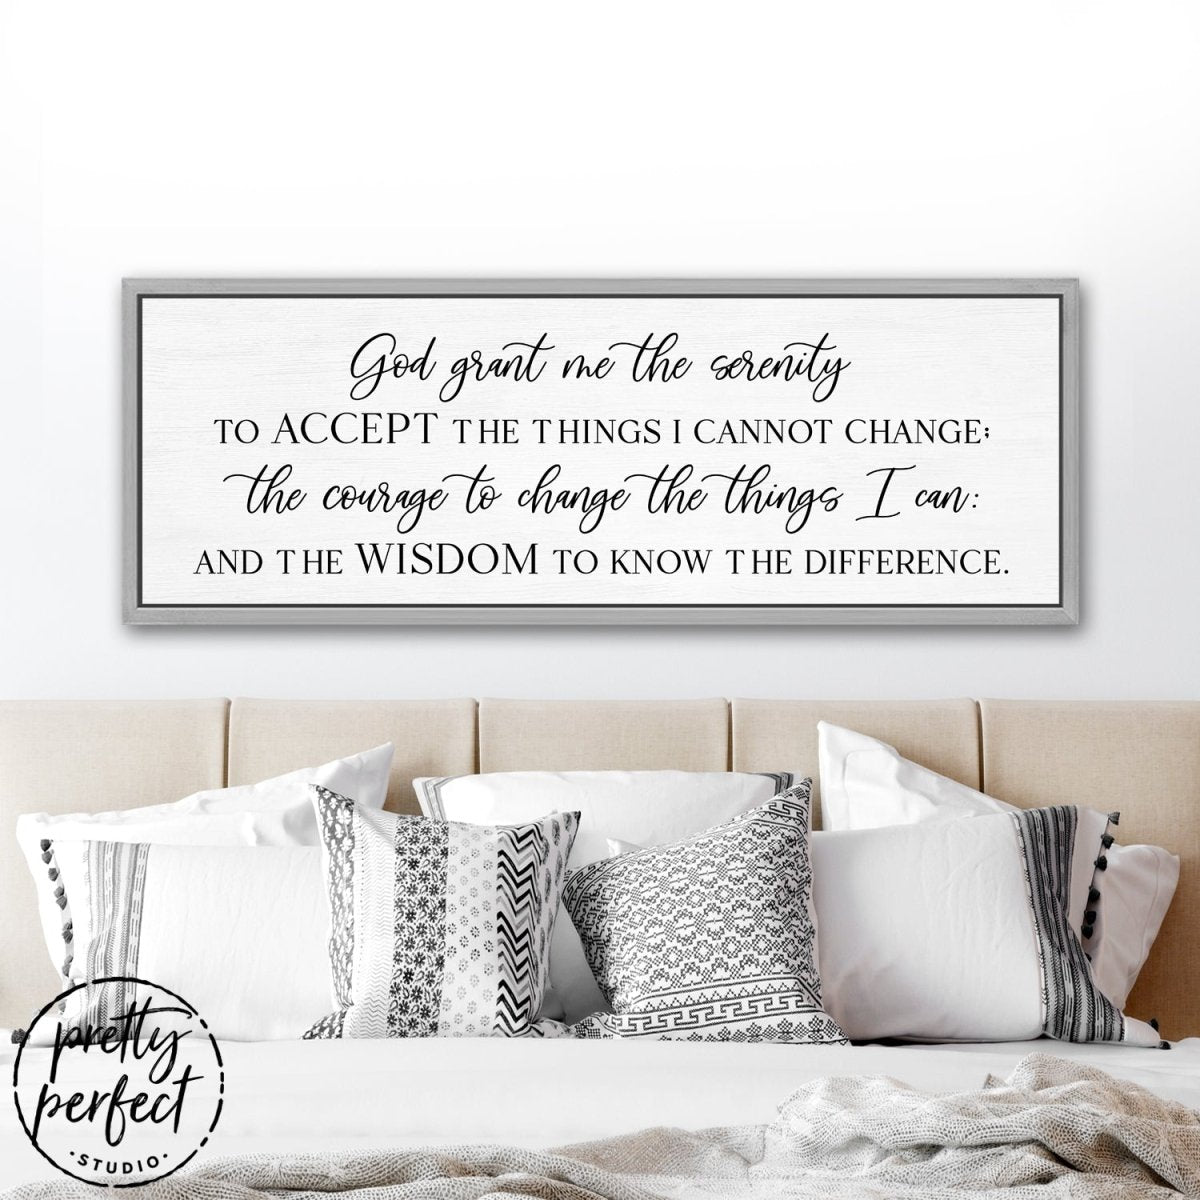 Serenity Prayer Sign Above Couch - Motivational Wall Art - Pretty Perfect Studio